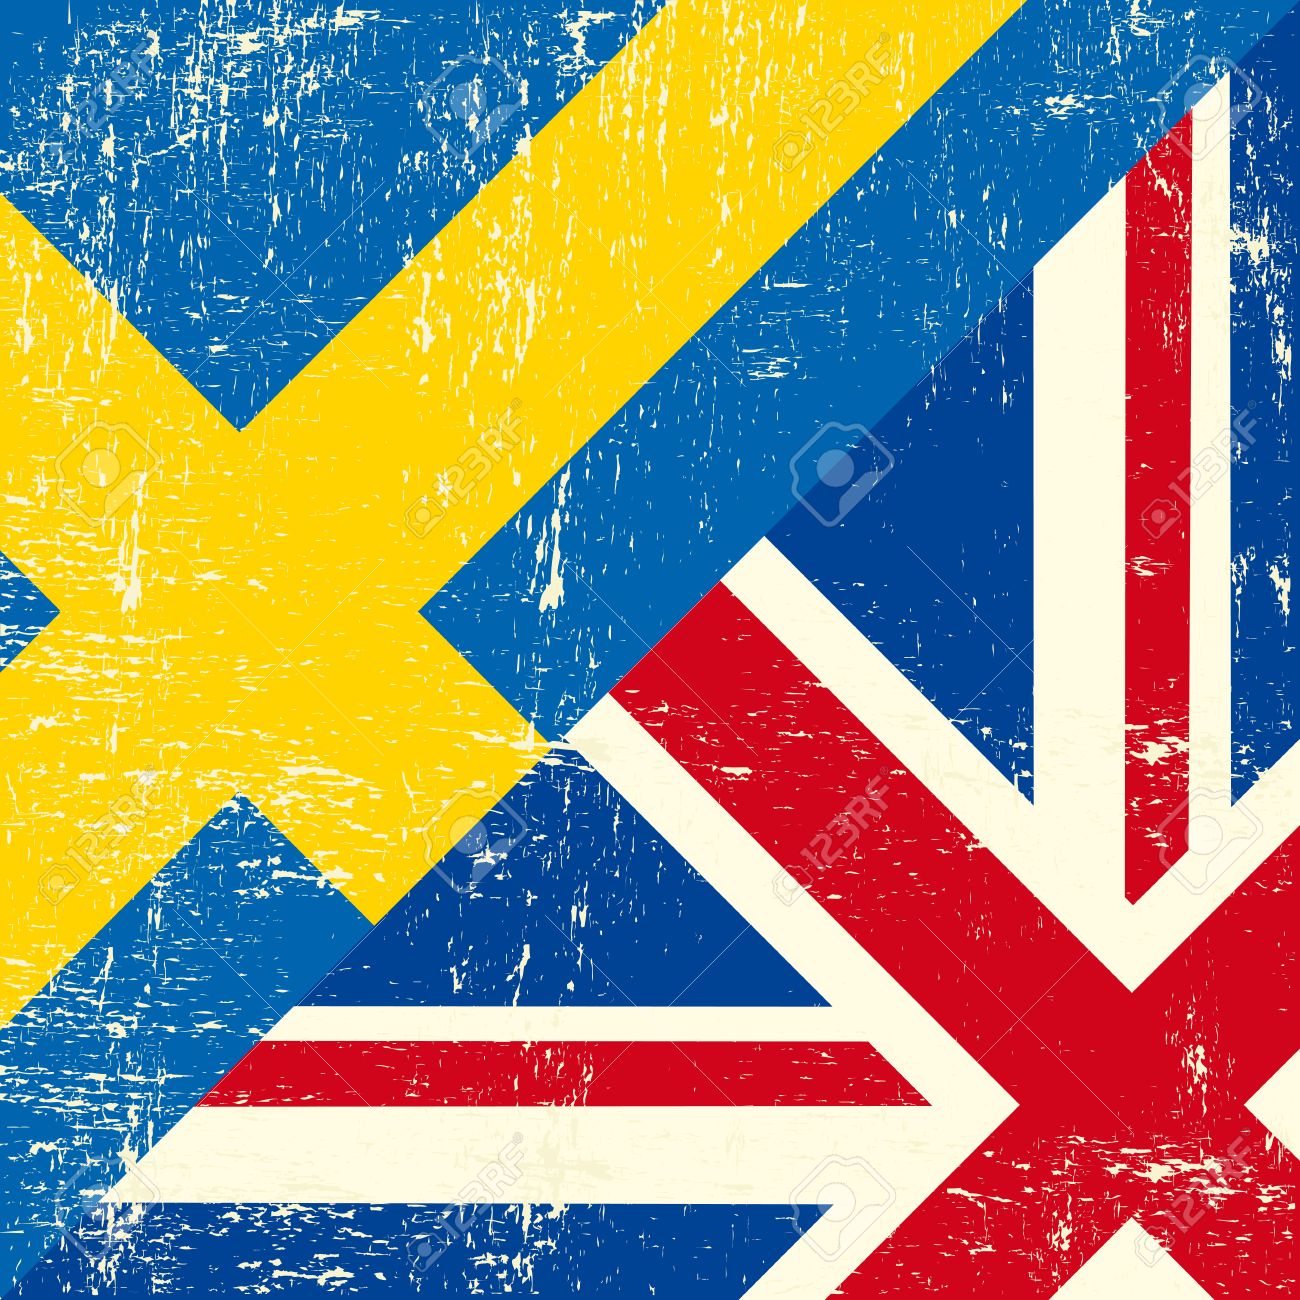 Is the uk bigger than sweden?